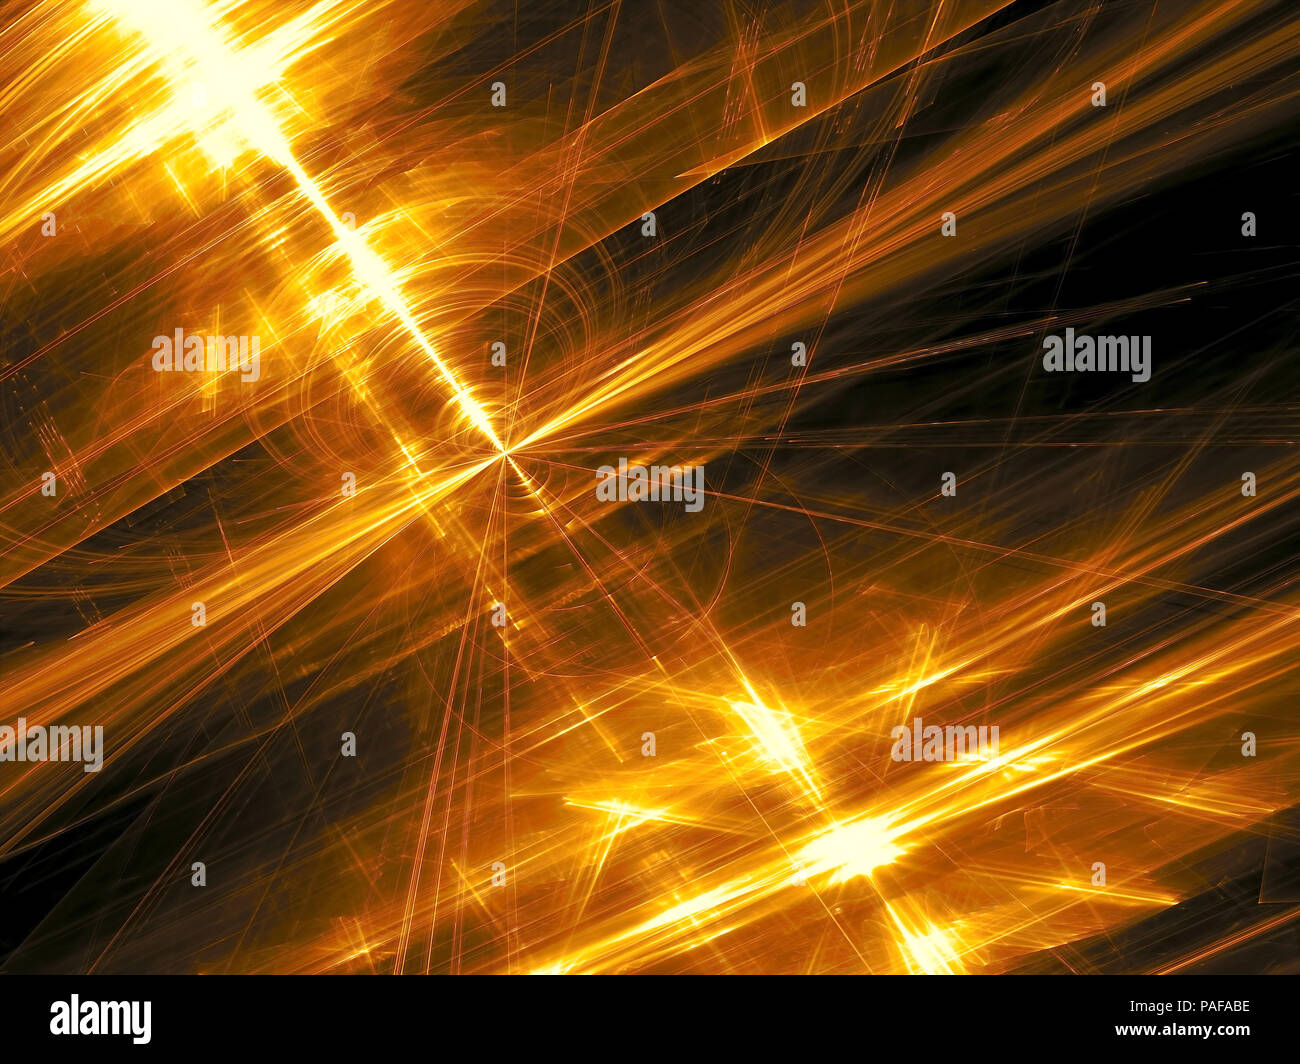 Glossy surface - abstract digitally generated image Stock Photo